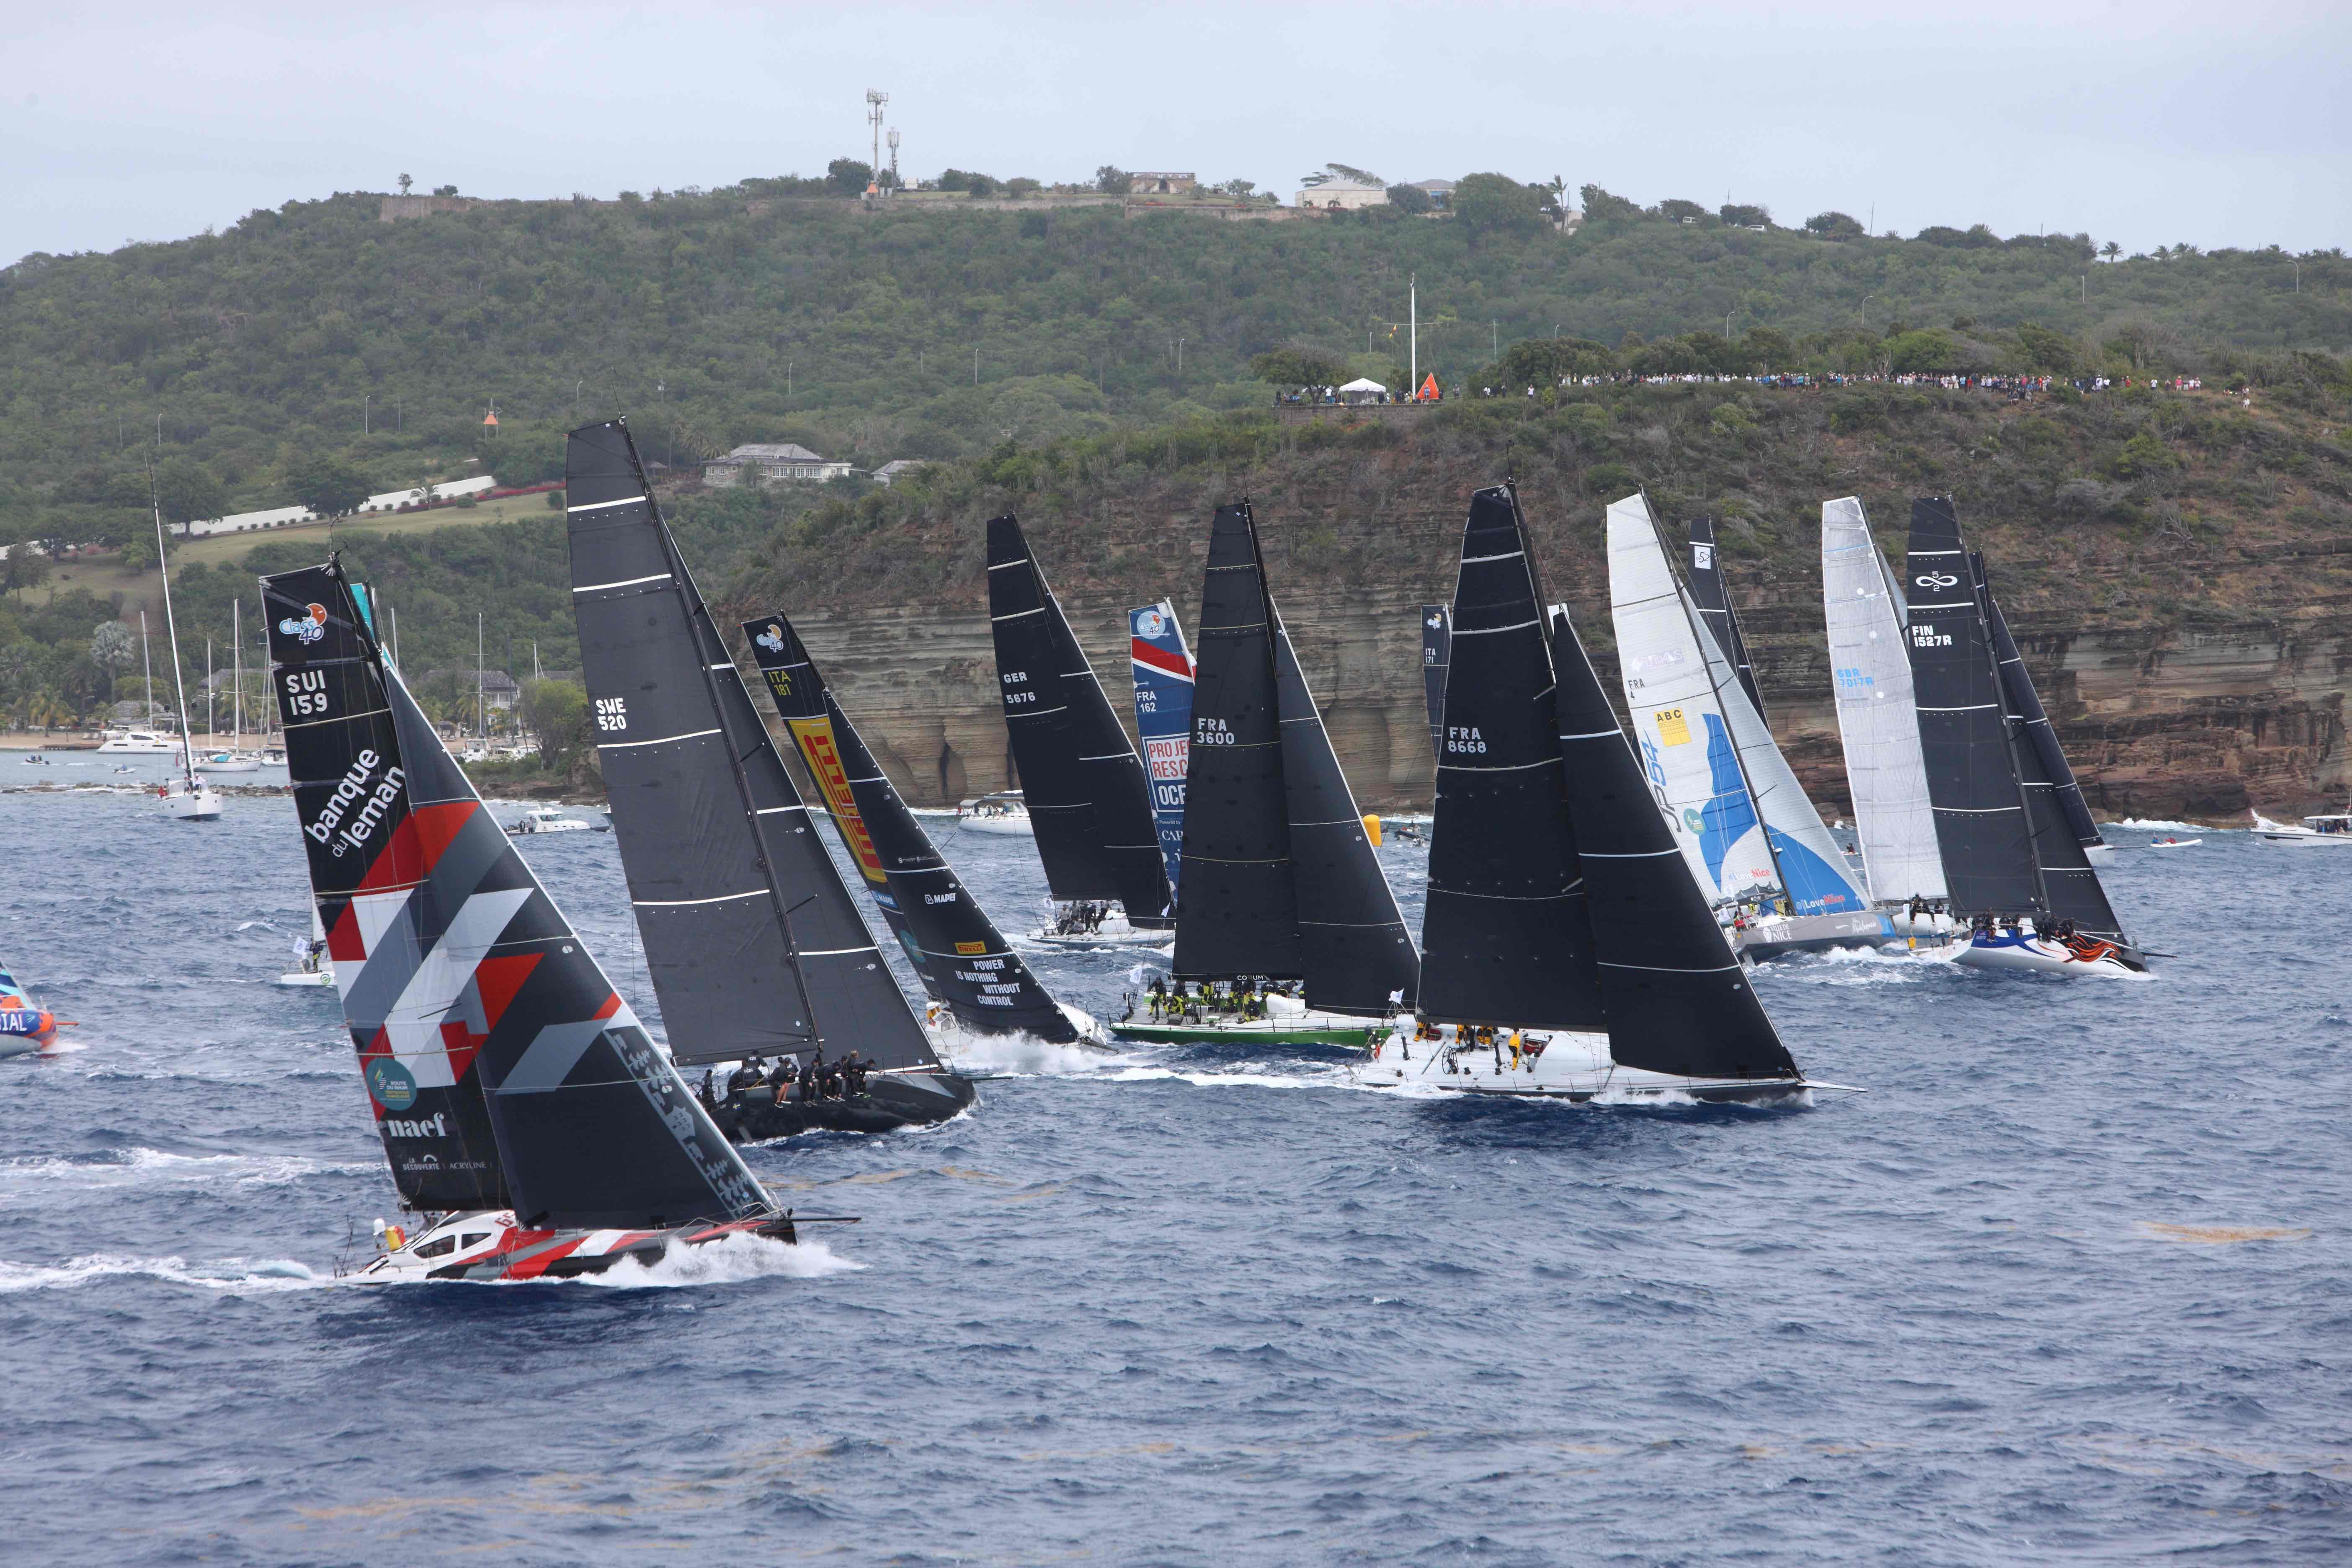 An impressive sight at the start of the 14th RORC Caribbean 600 as the IRC Zero and Class40 fleet set off © Tim Wright/Photoaction.com